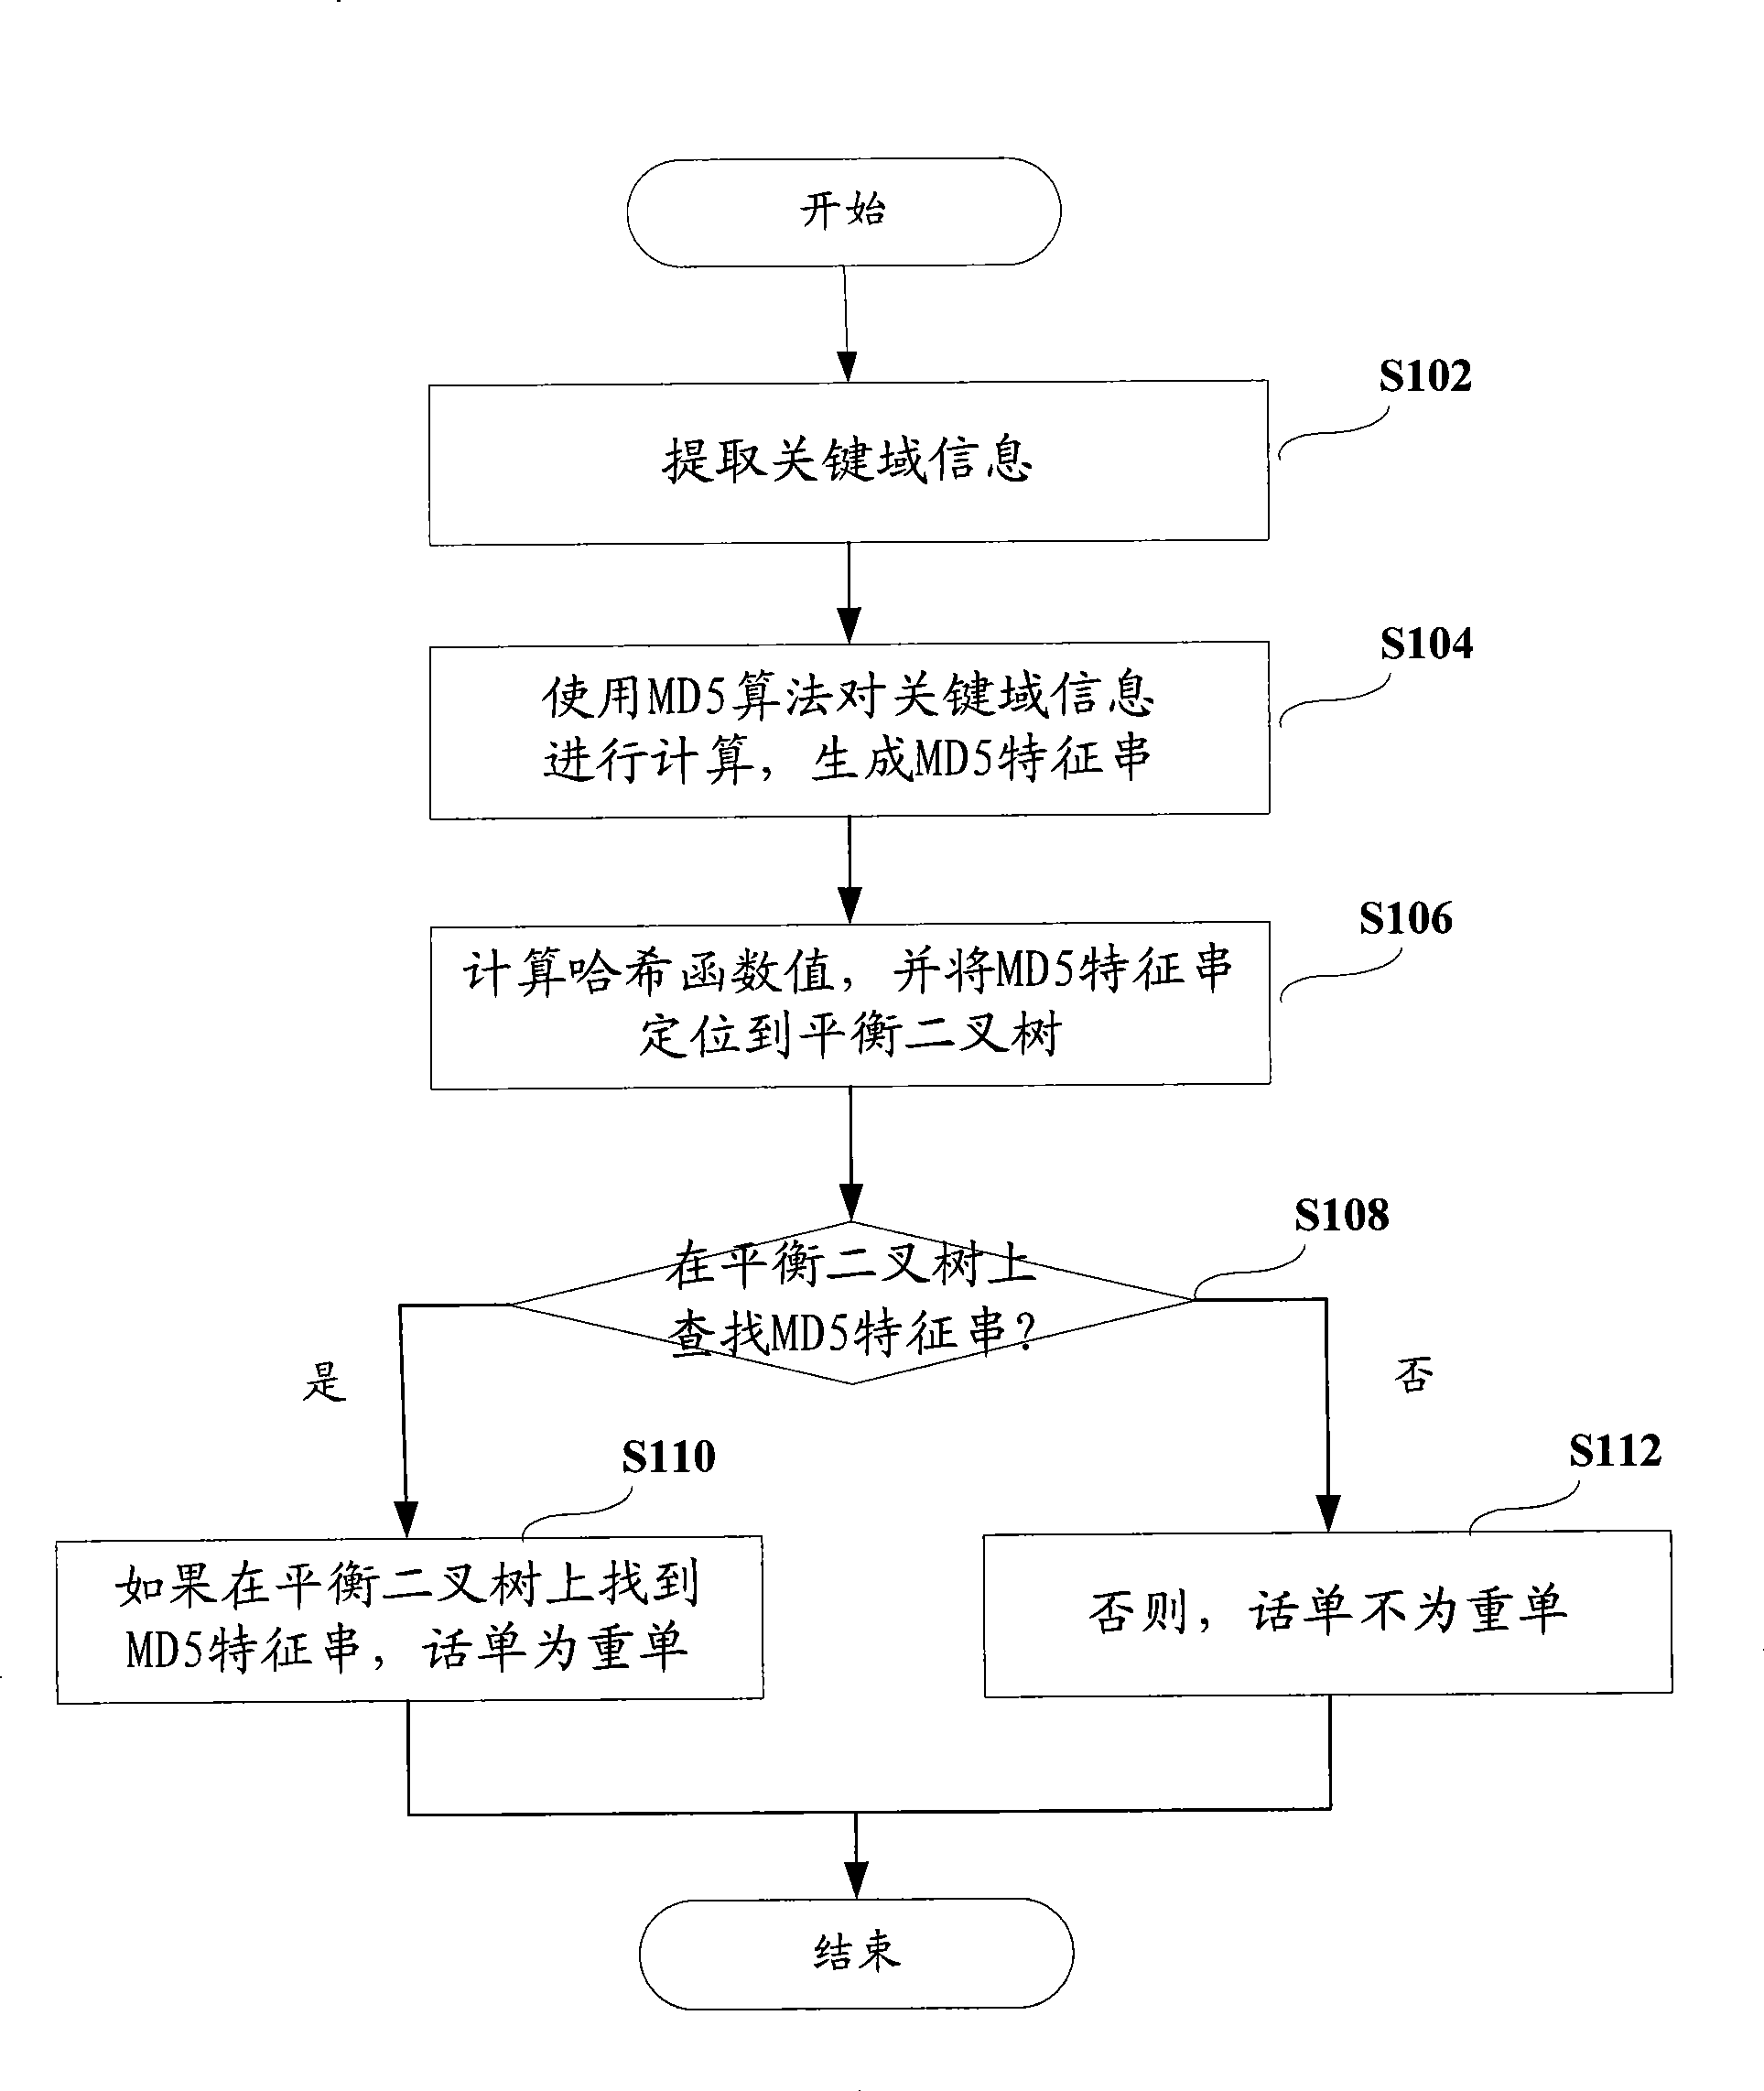 Method and apparatus for removing call ticket repeat